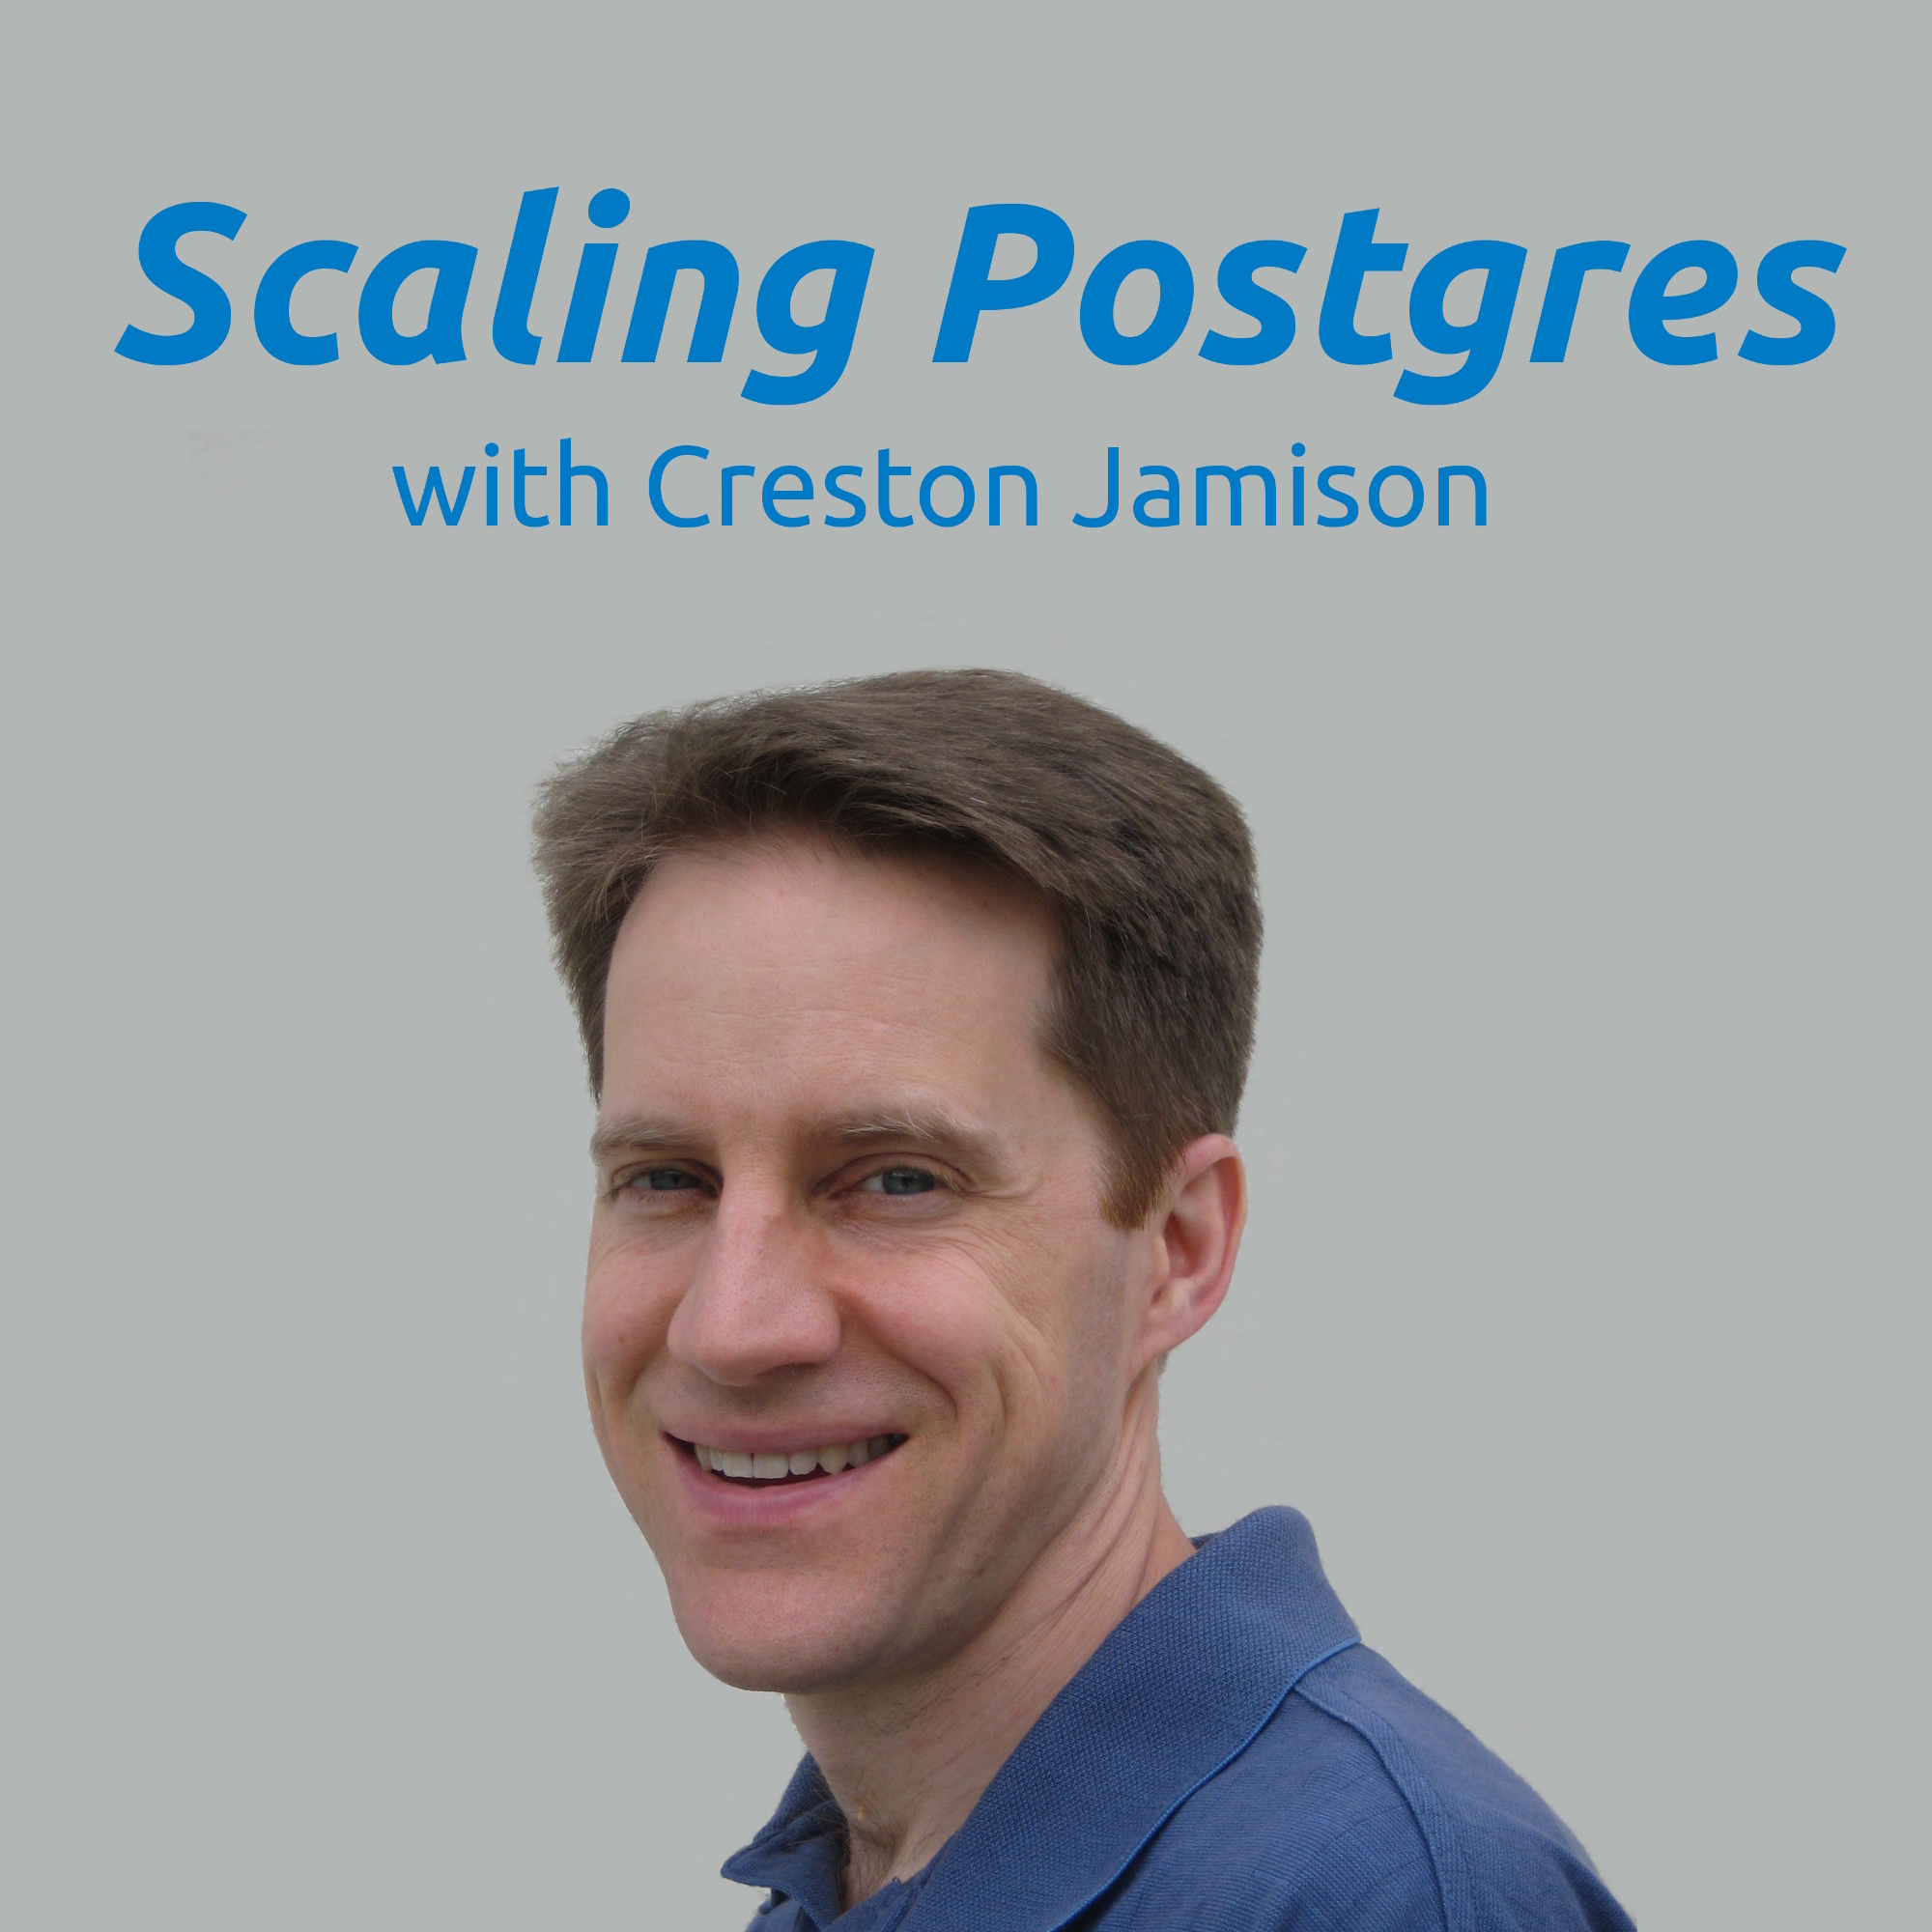 Index Include Clause, Exporting CSV, JSON, Zedstore | Scaling Postgres 62